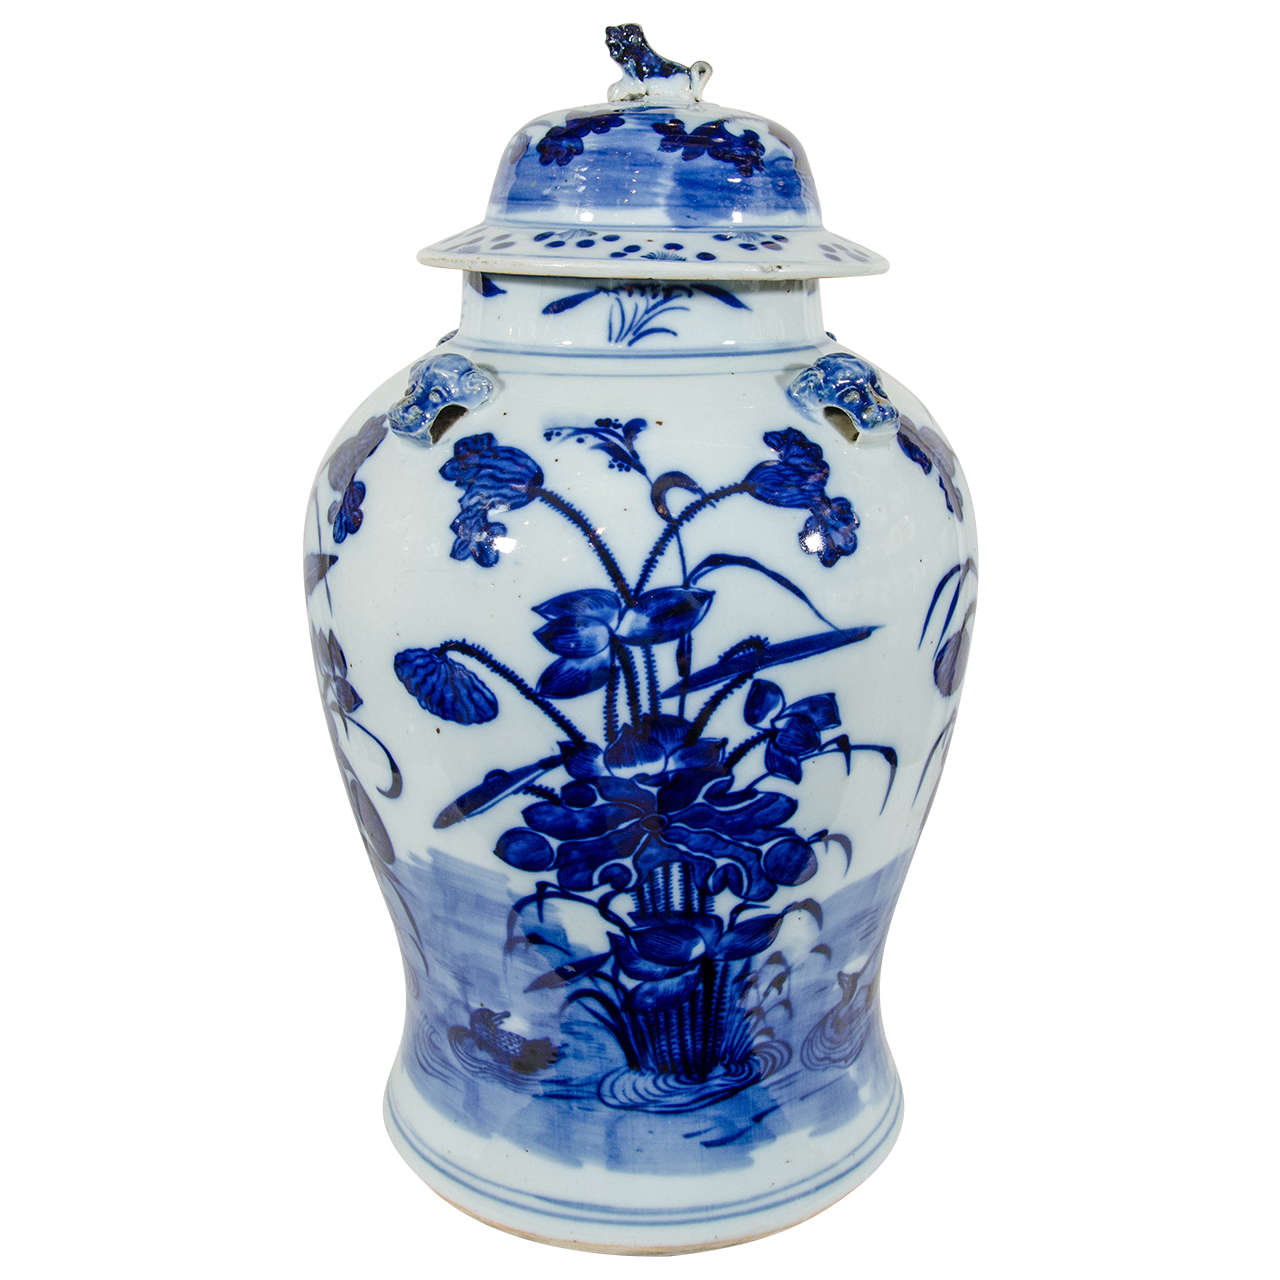  Antique Chinese Porcelain Vase Blue and White